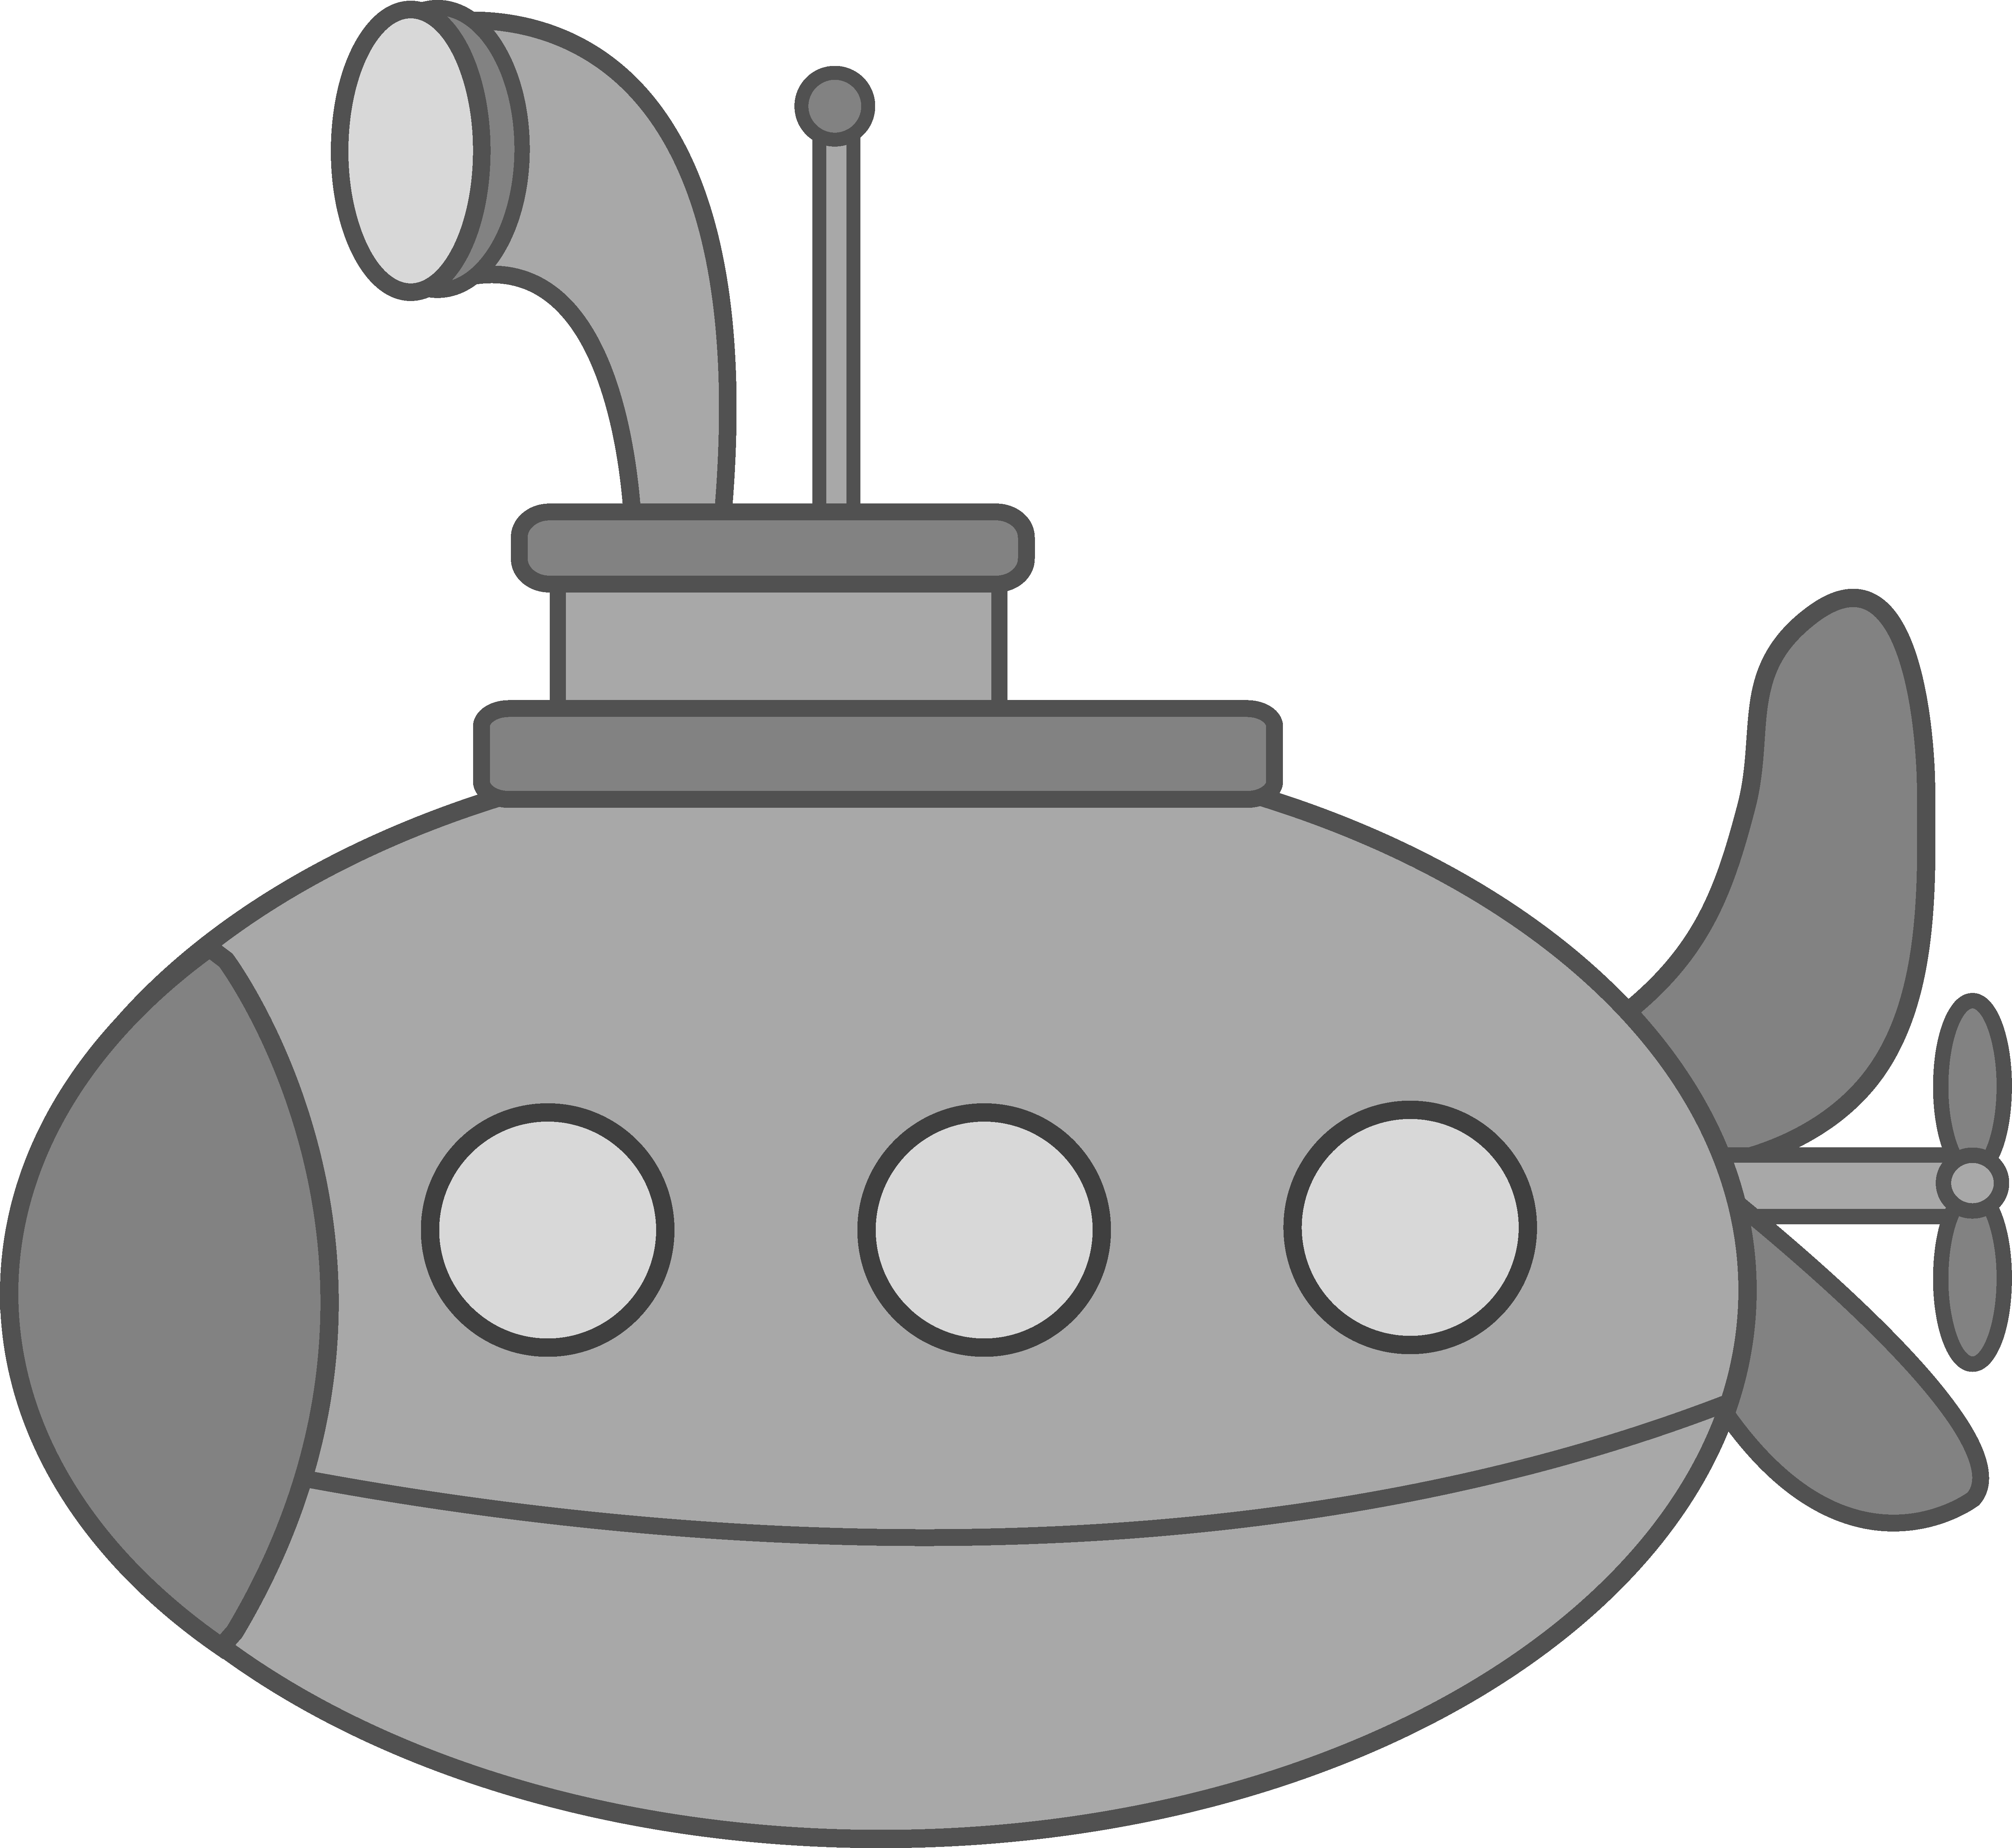 Submarine clipart #3, Download drawings